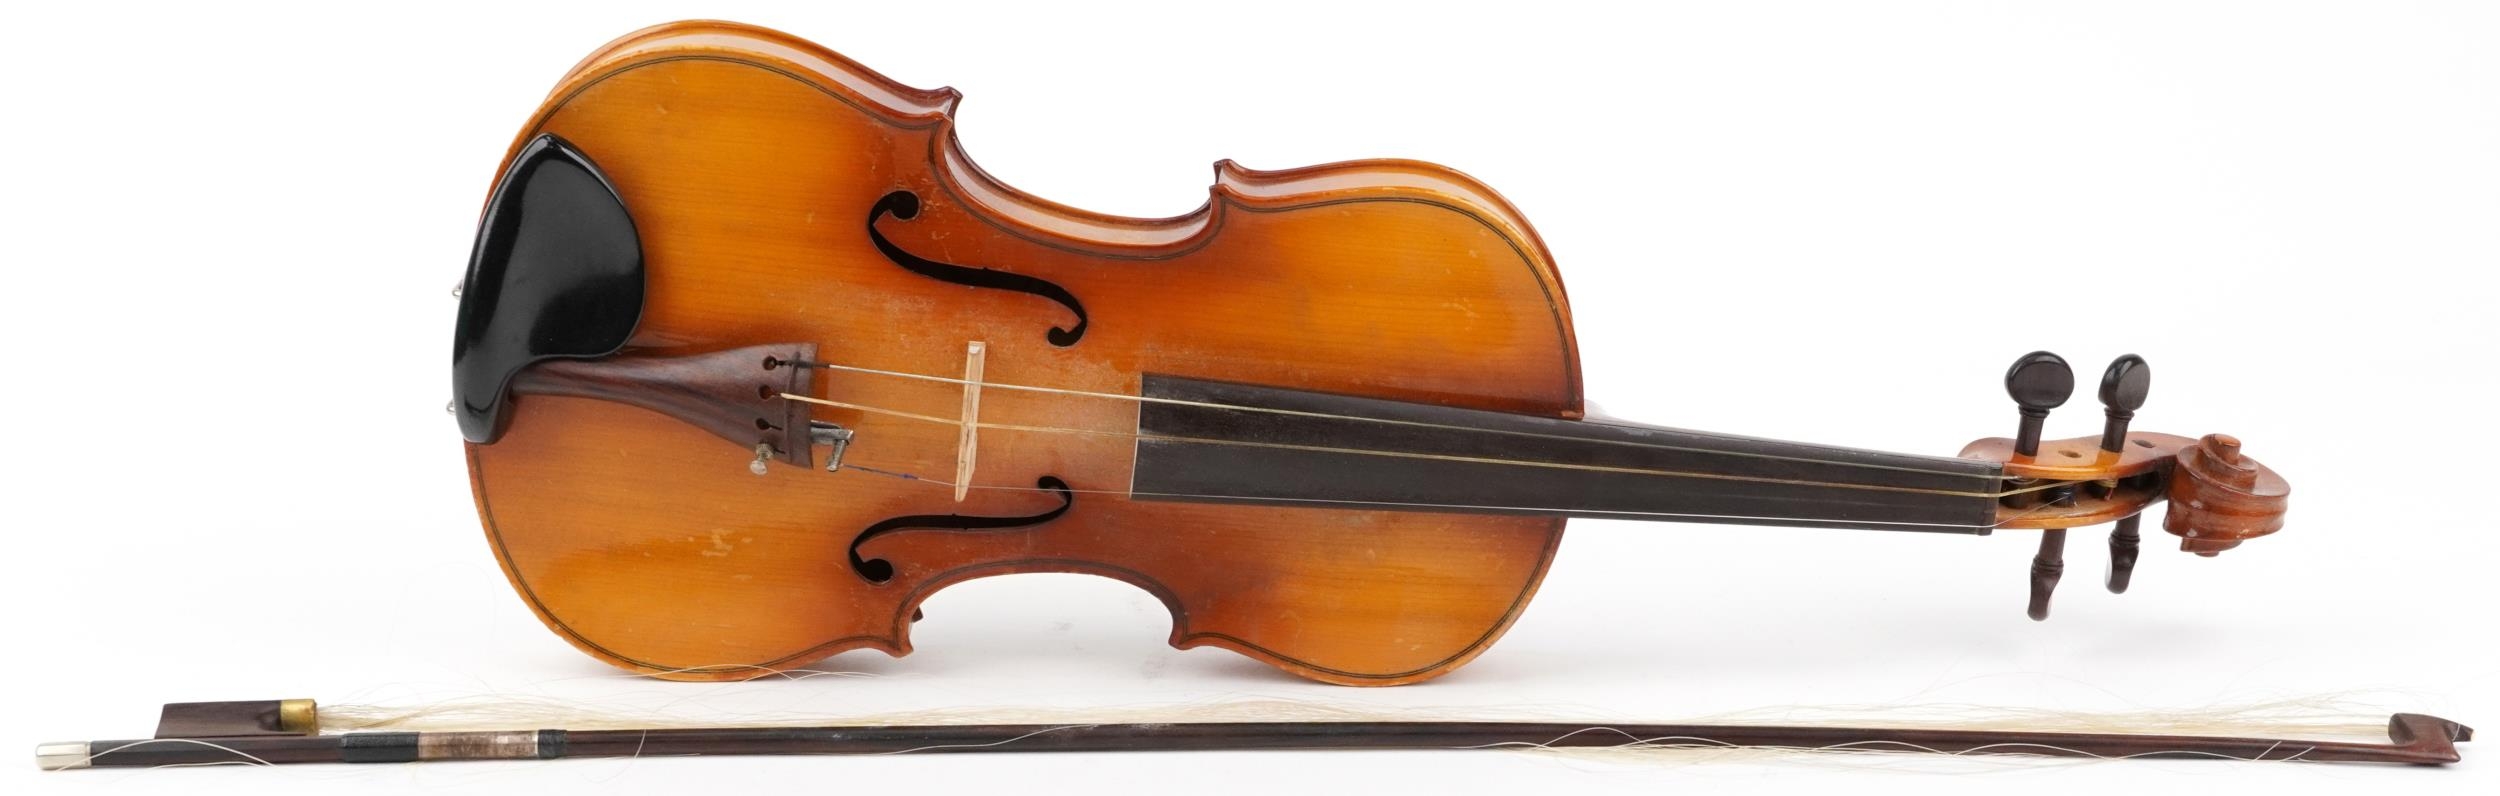 Blessing wooden violin with one piece back and rosewood bow housed in a protective case, the